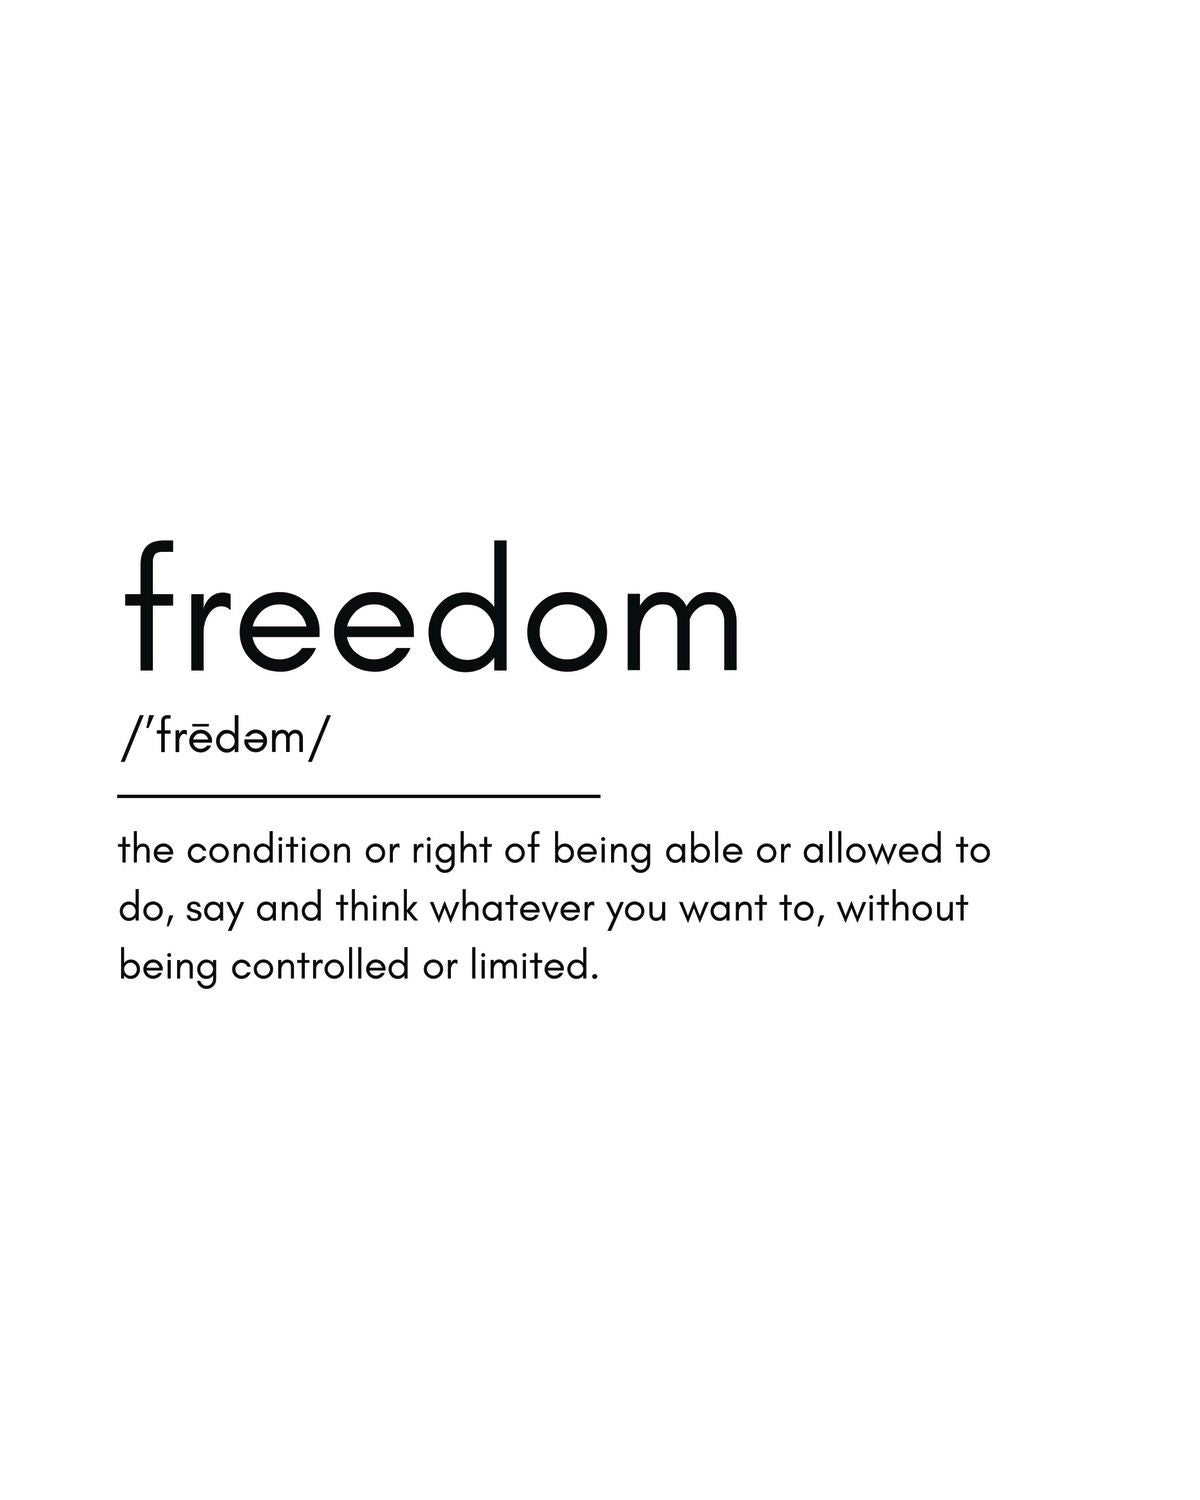 Definition of Freedom